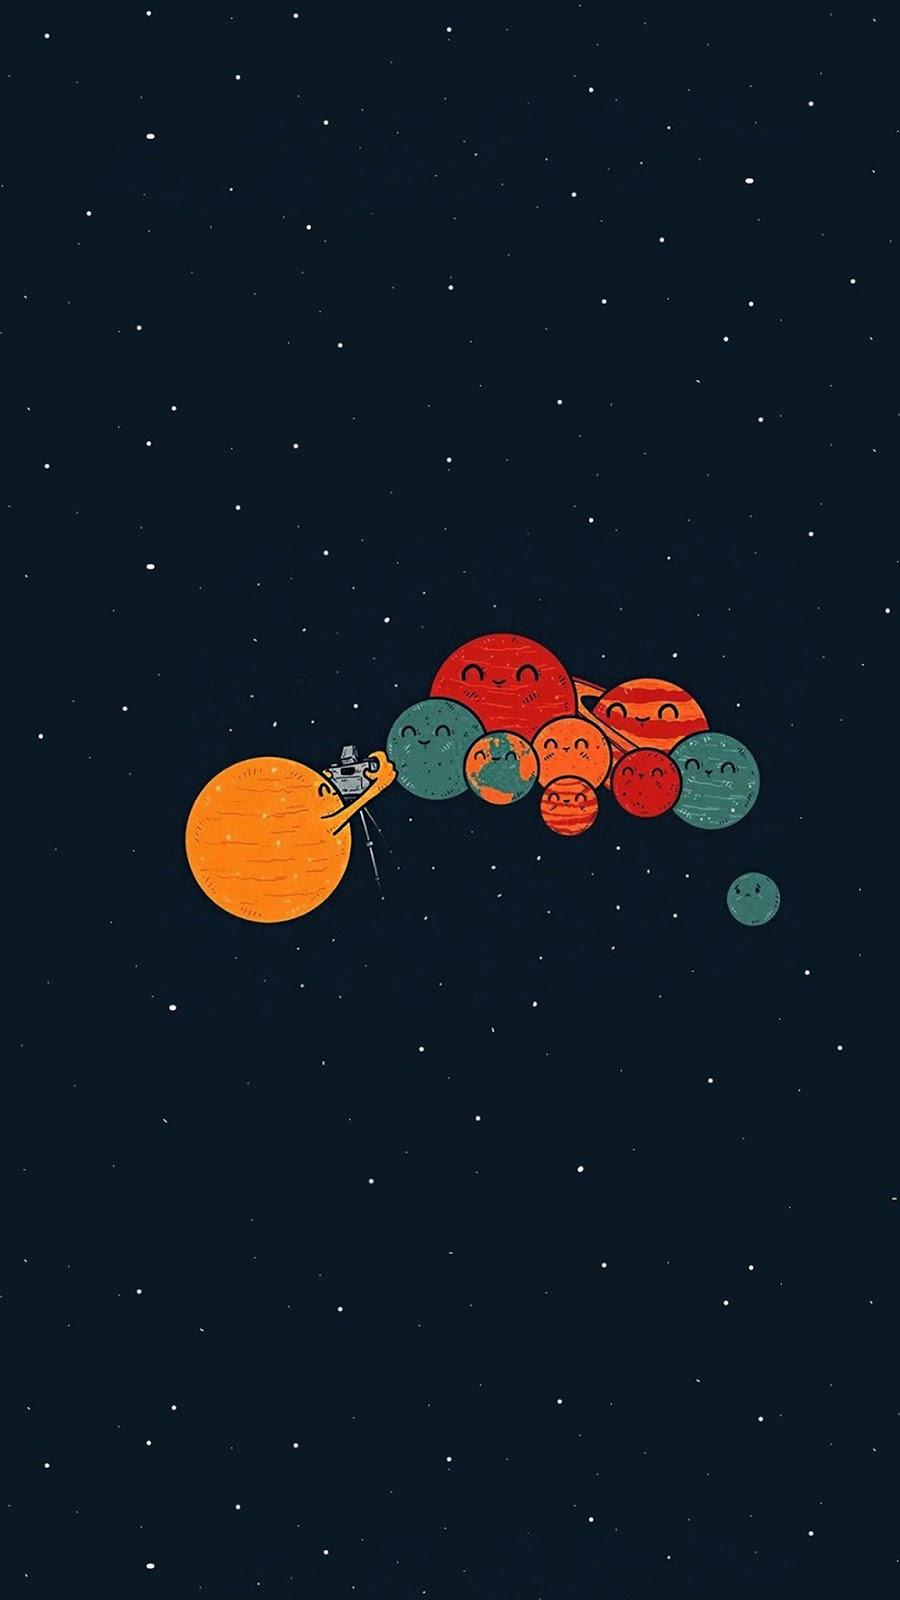 planets-cute-illustration-space-art-blue-red-iphone6-plus-wallpaper.jpg